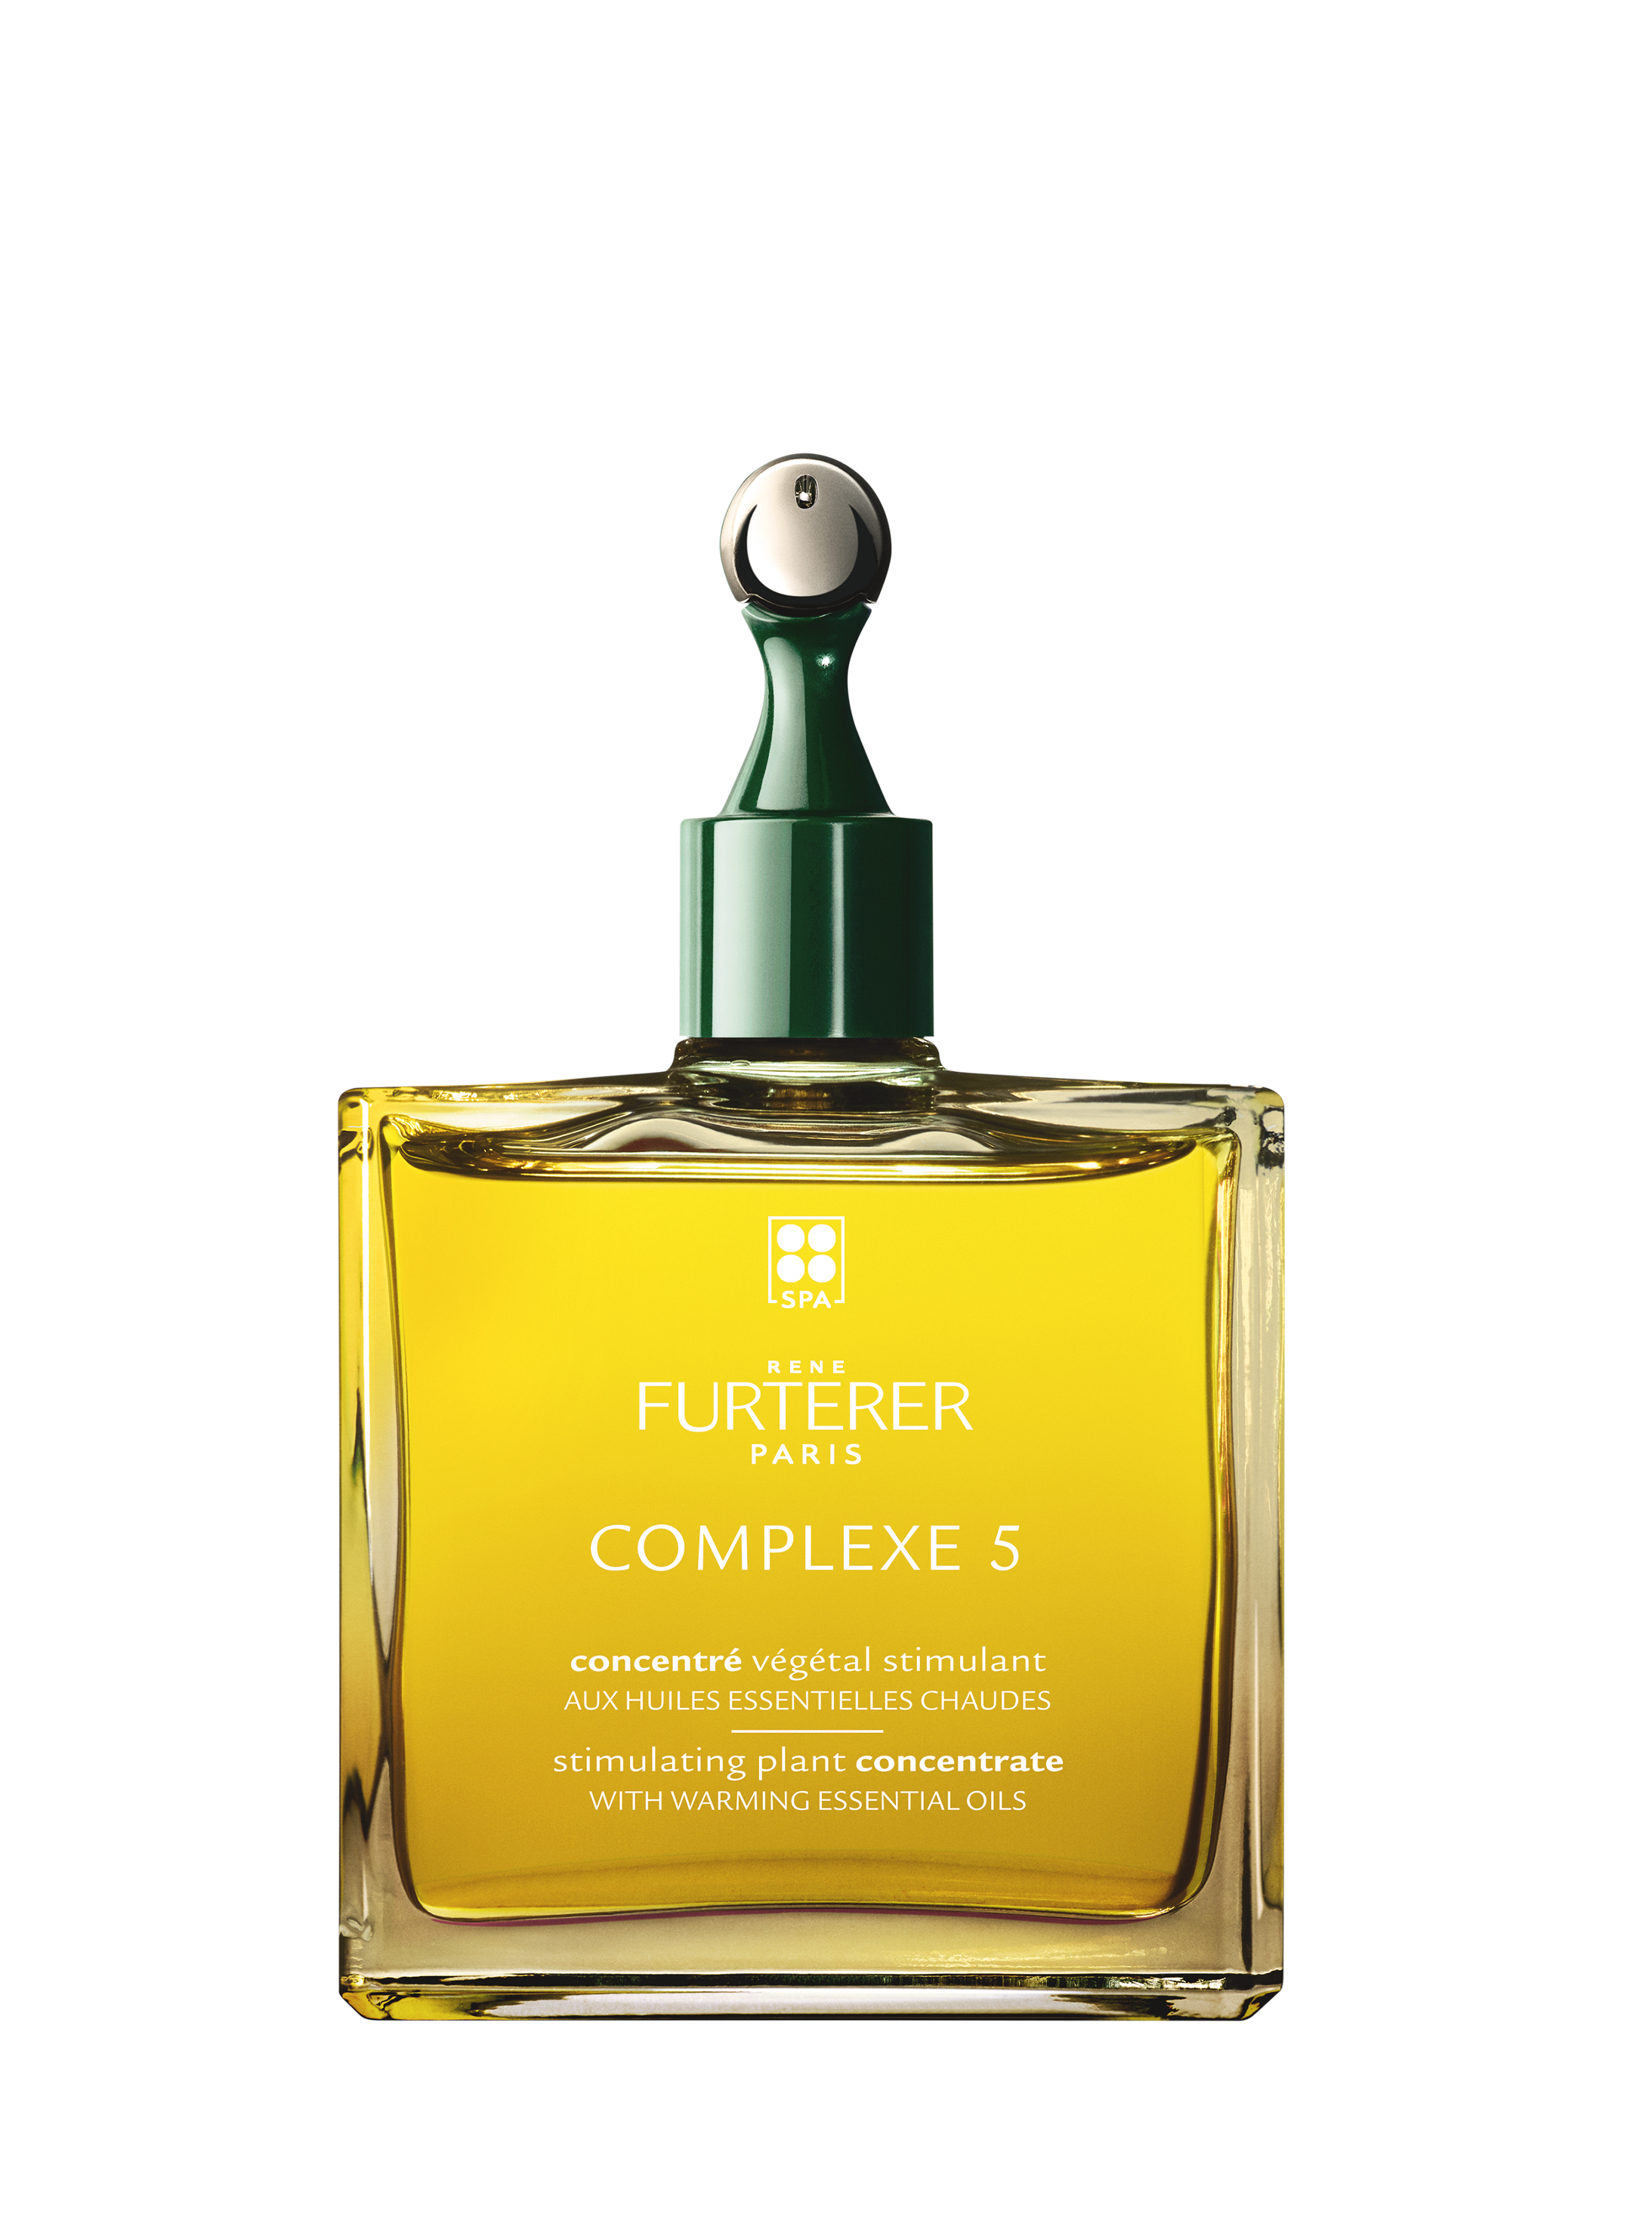 RF_COMPLEXE-5_Stimulating-plant-concentrate_Packshot_Retail_50ml_3282770206166